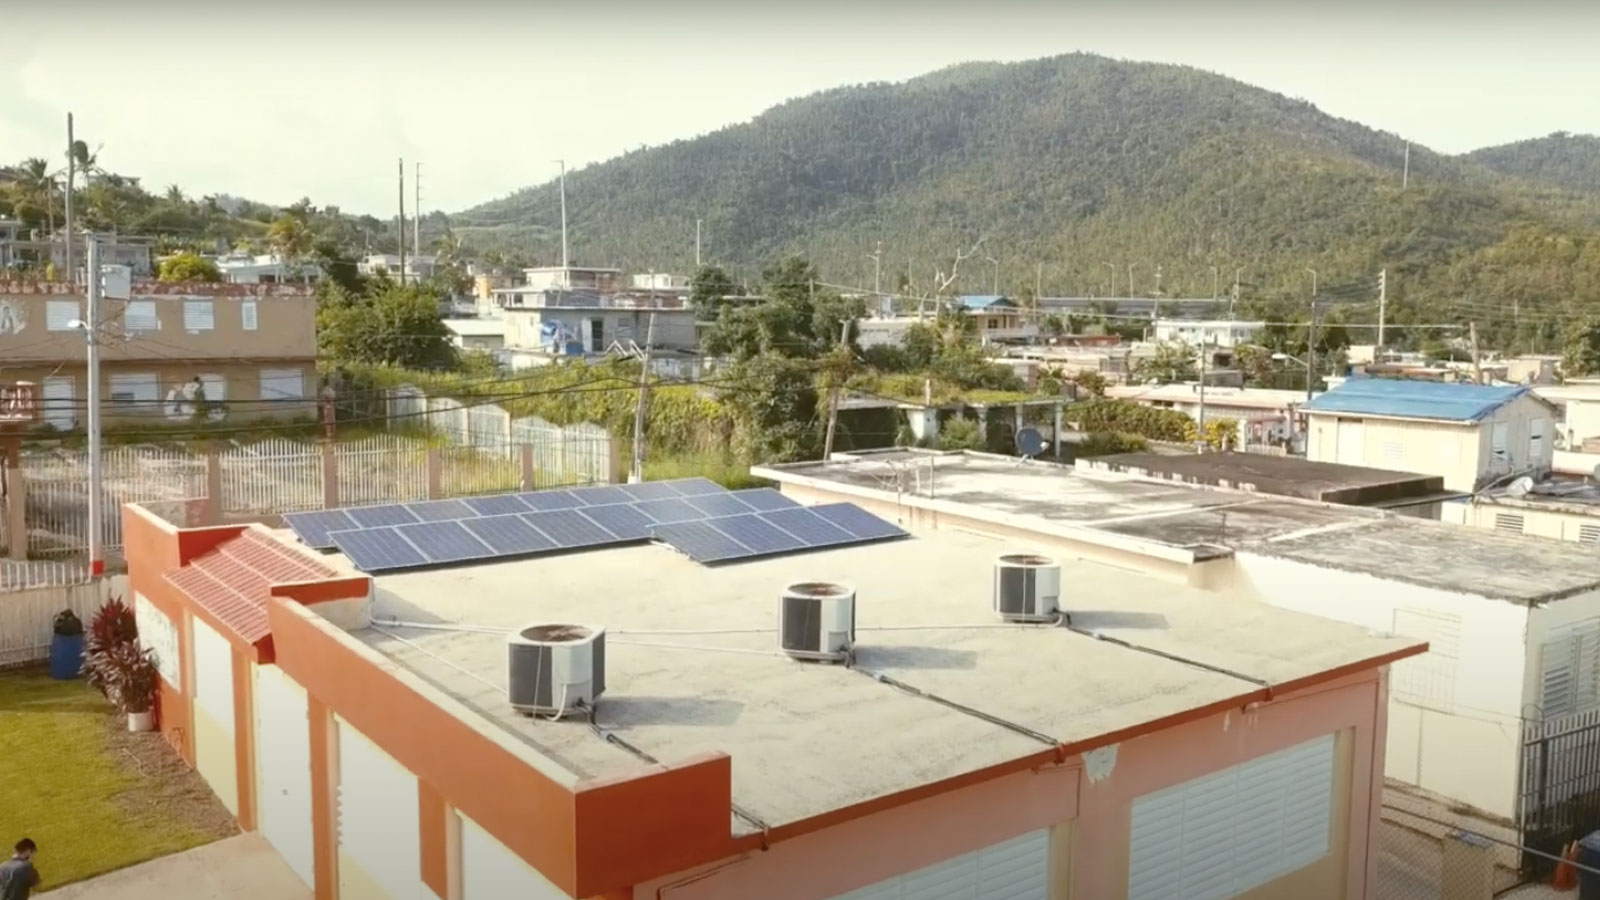 Resilient Power solar in Puerto Rico